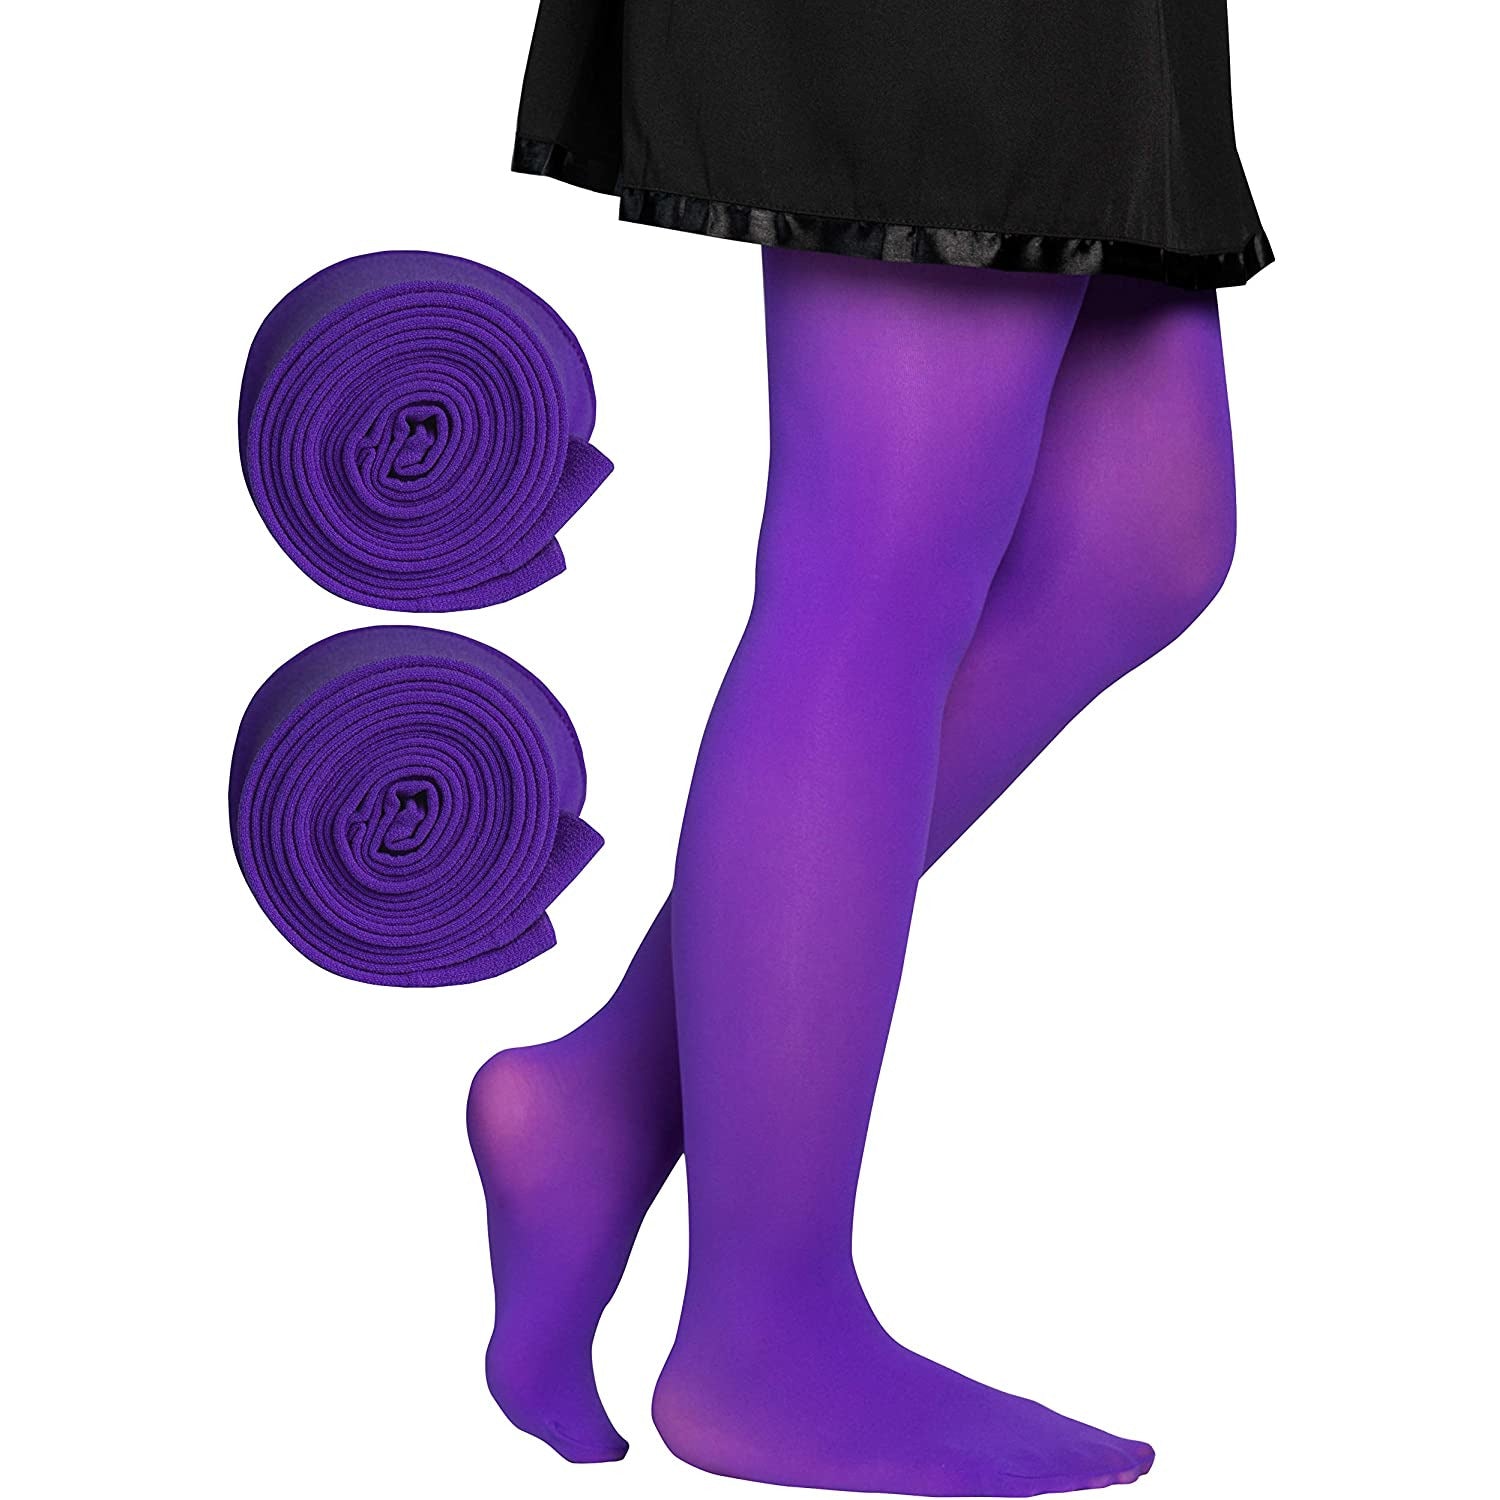 Dancina Ballet Dance Tights Footed - Ultra-soft Pro Excellent Hold&Stretch  (Toddler/Girls/Women)